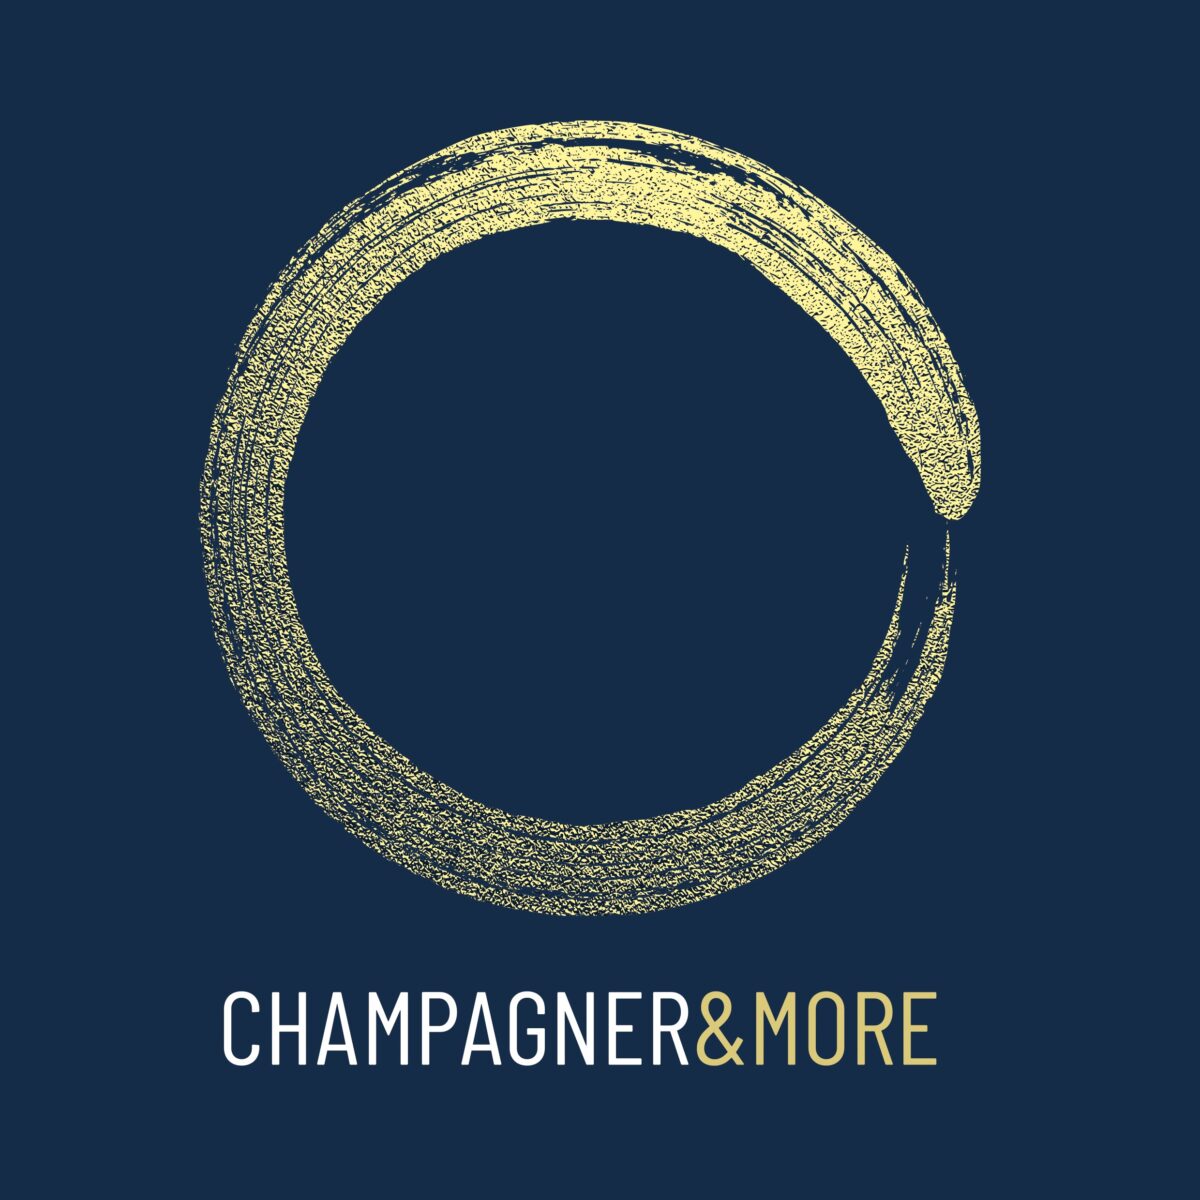 Champagner and more